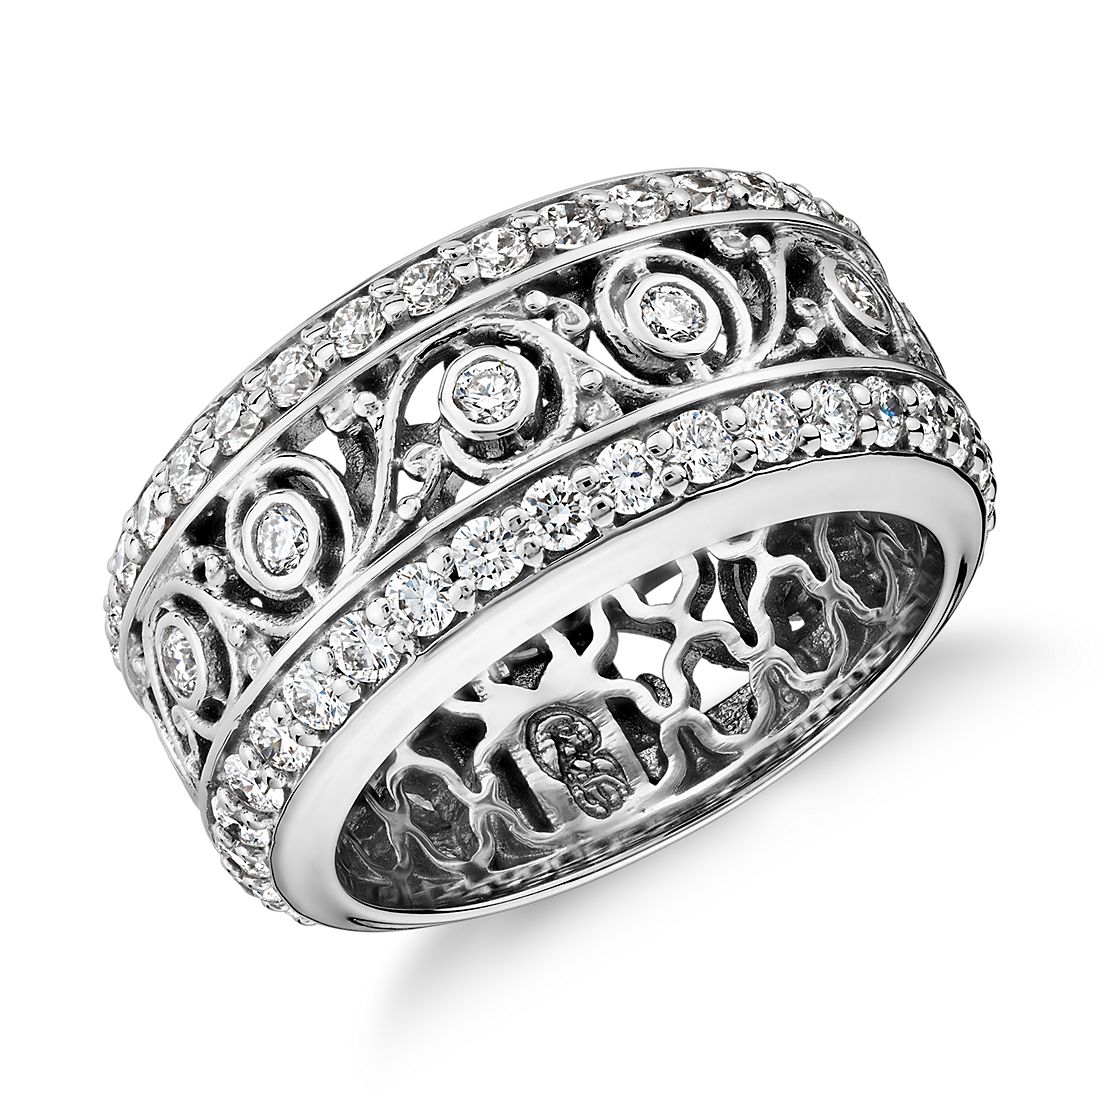 Bella Vaughan for Blue Nile Lace Diamond Eternity Ring in 18k White Gold (1 3/8 ct. tw.)